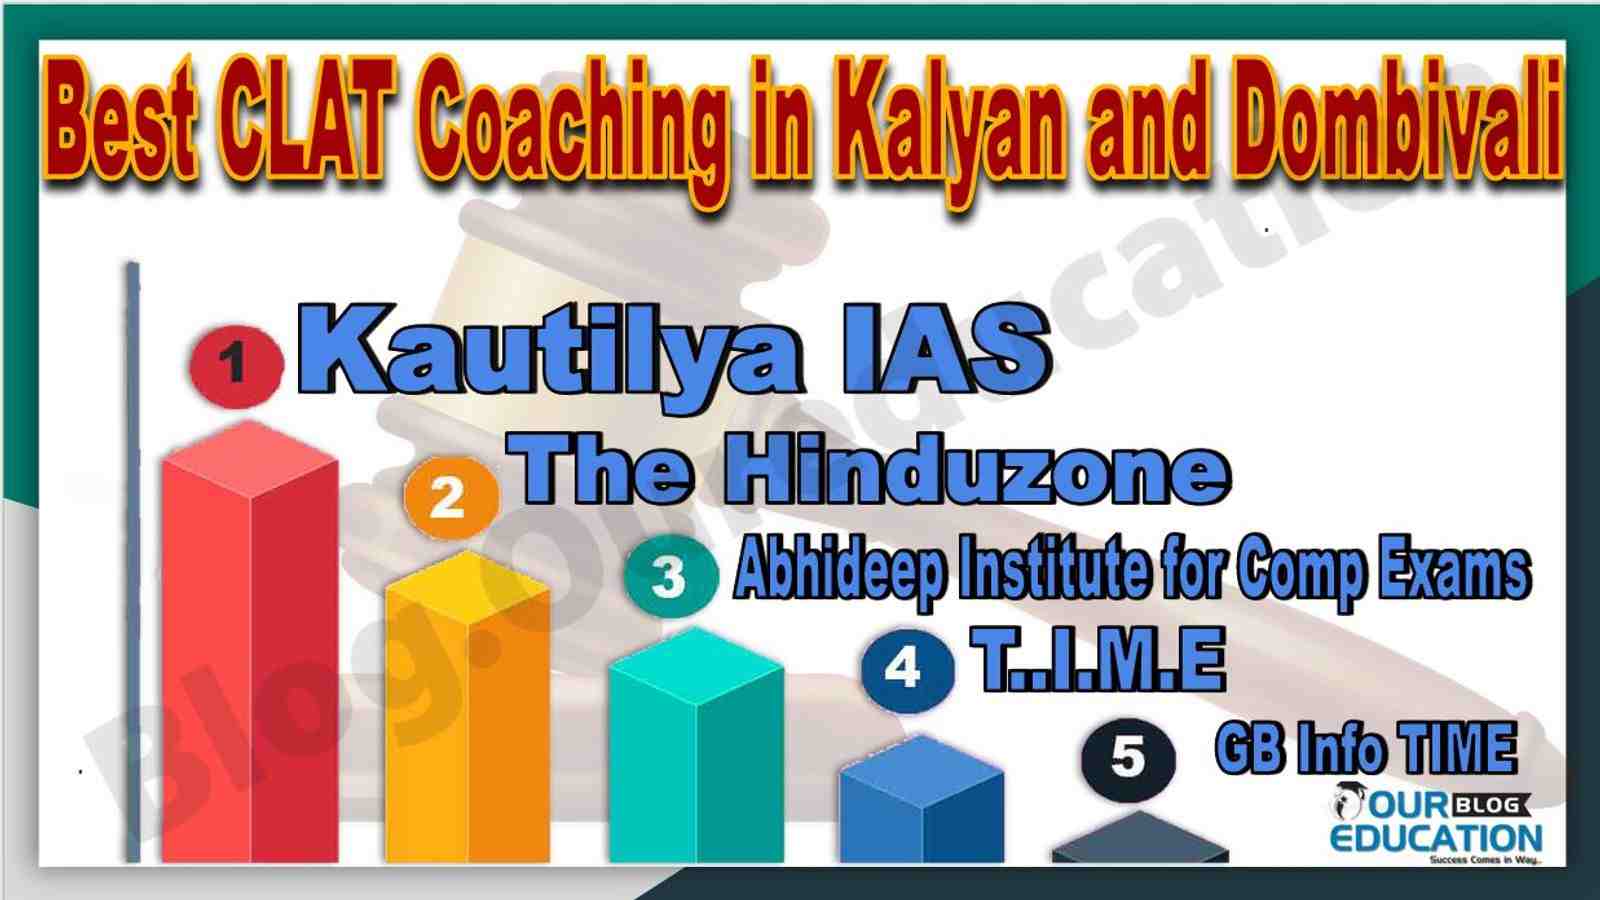 Best 10 CLAT Coaching in Kalyan and Dombivli | Our Education